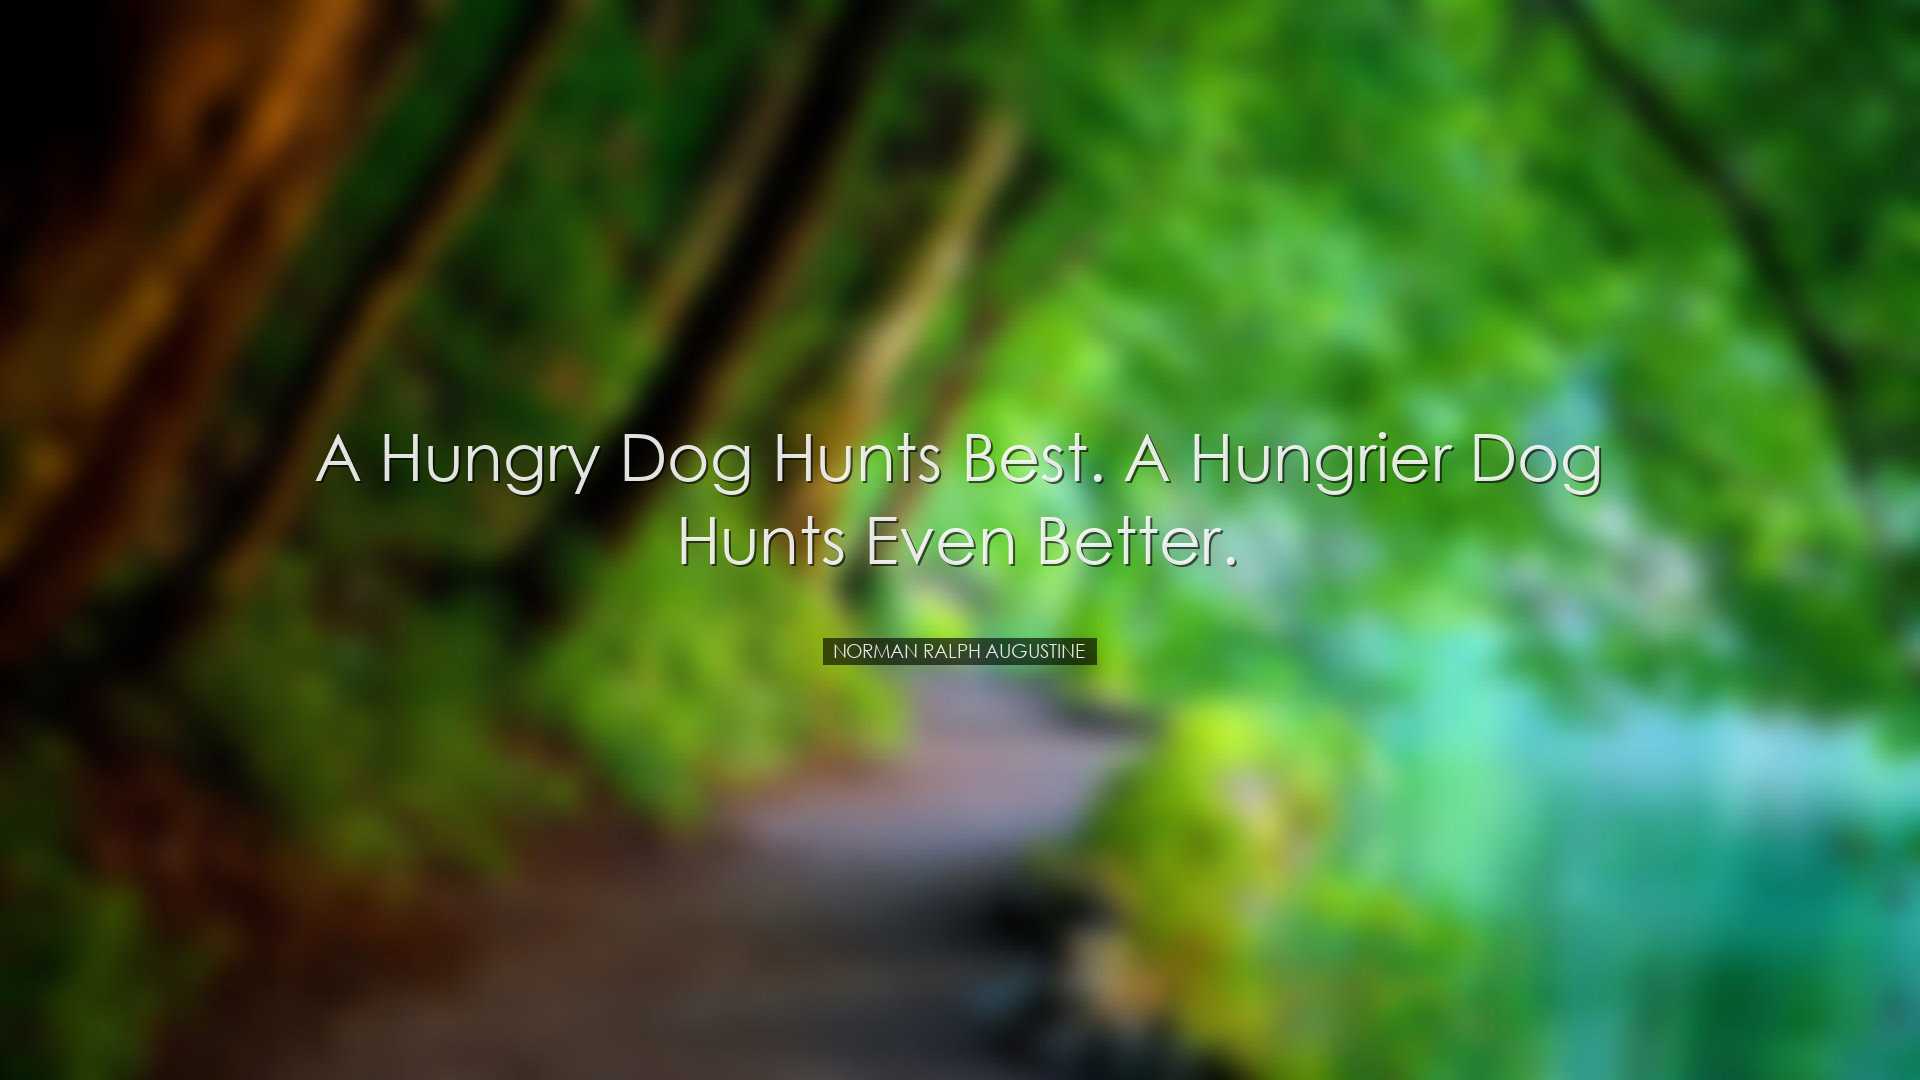 A hungry dog hunts best. A hungrier dog hunts even better. - Norma